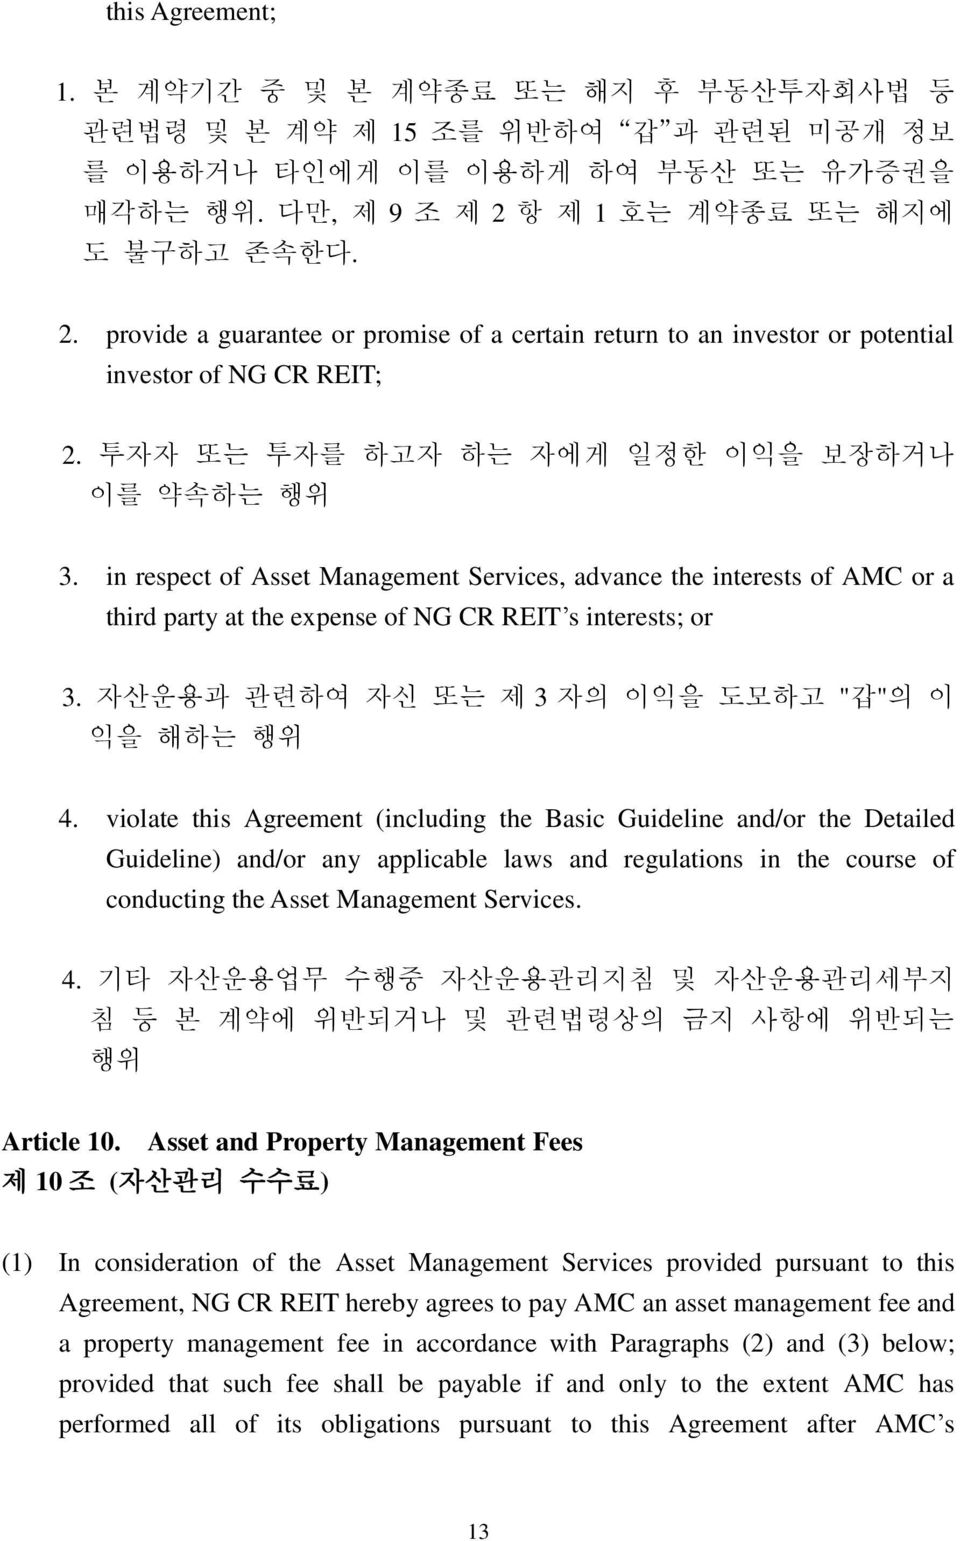 in respect of Asset Management Services, advance the interests of AMC or a third party at the expense of NG CR REIT s interests; or 3. 자산운용과 관련하여 자신 또는 제 3 자의 이익을 도모하고 "갑"의 이 익을 해하는 행위 4.